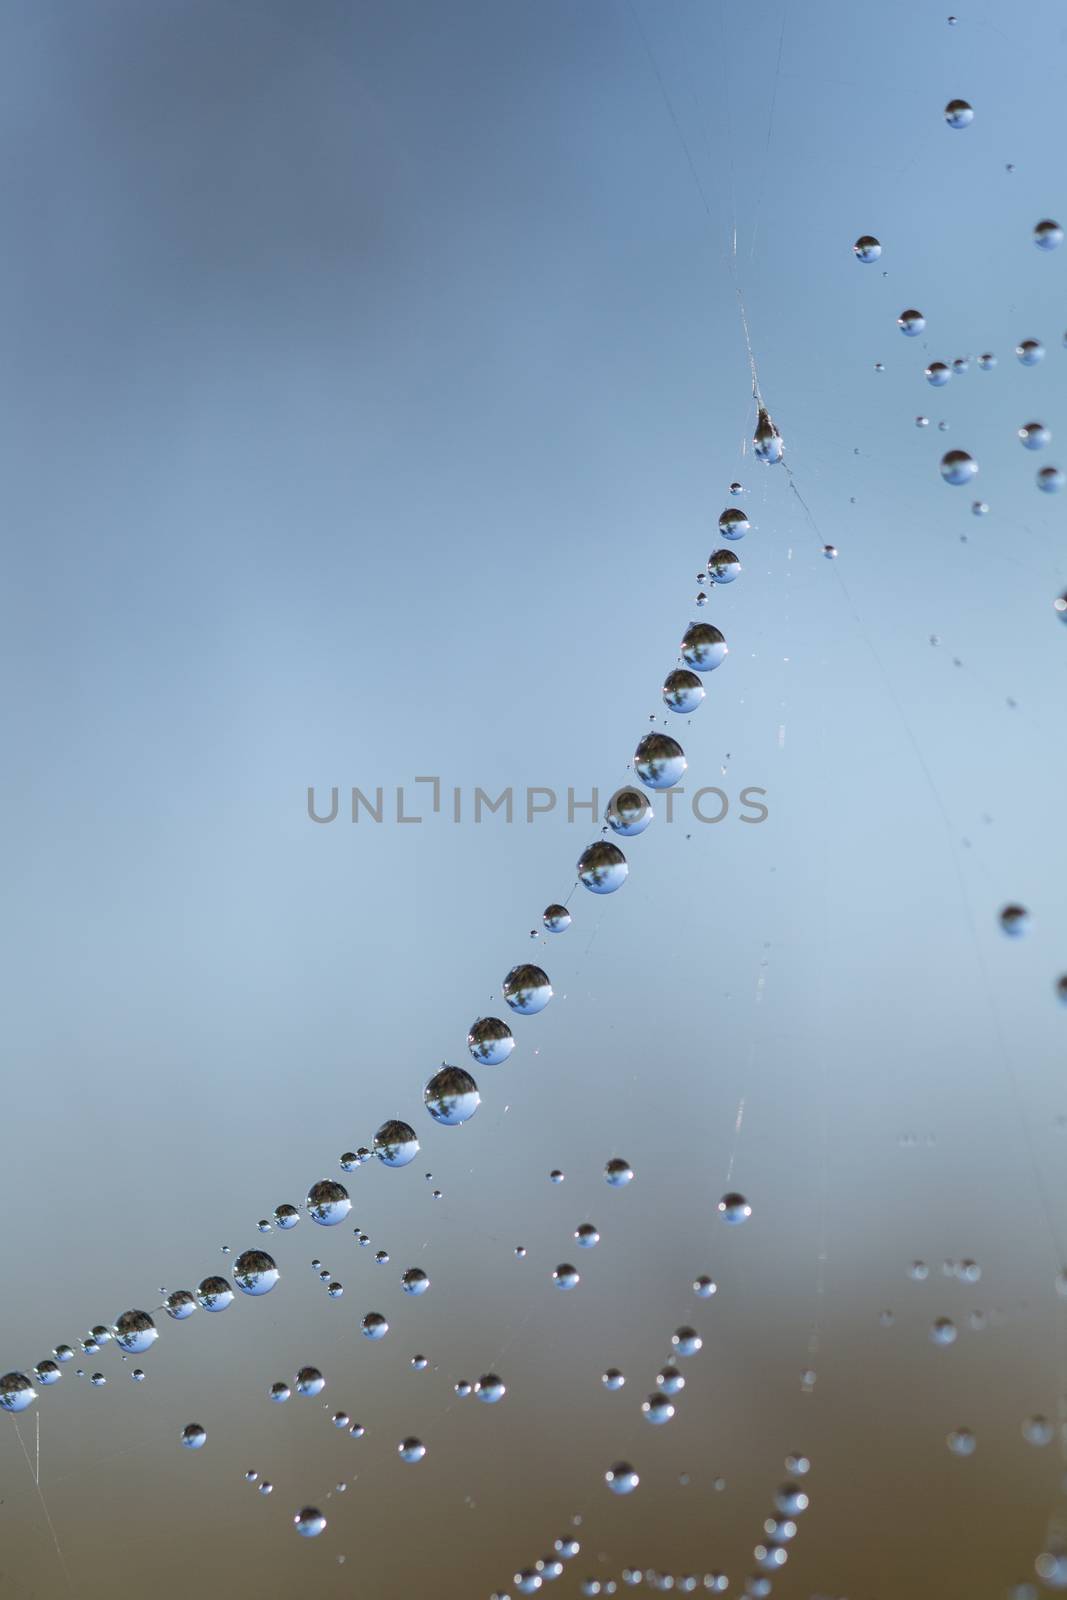 many drops of dew on a spider web